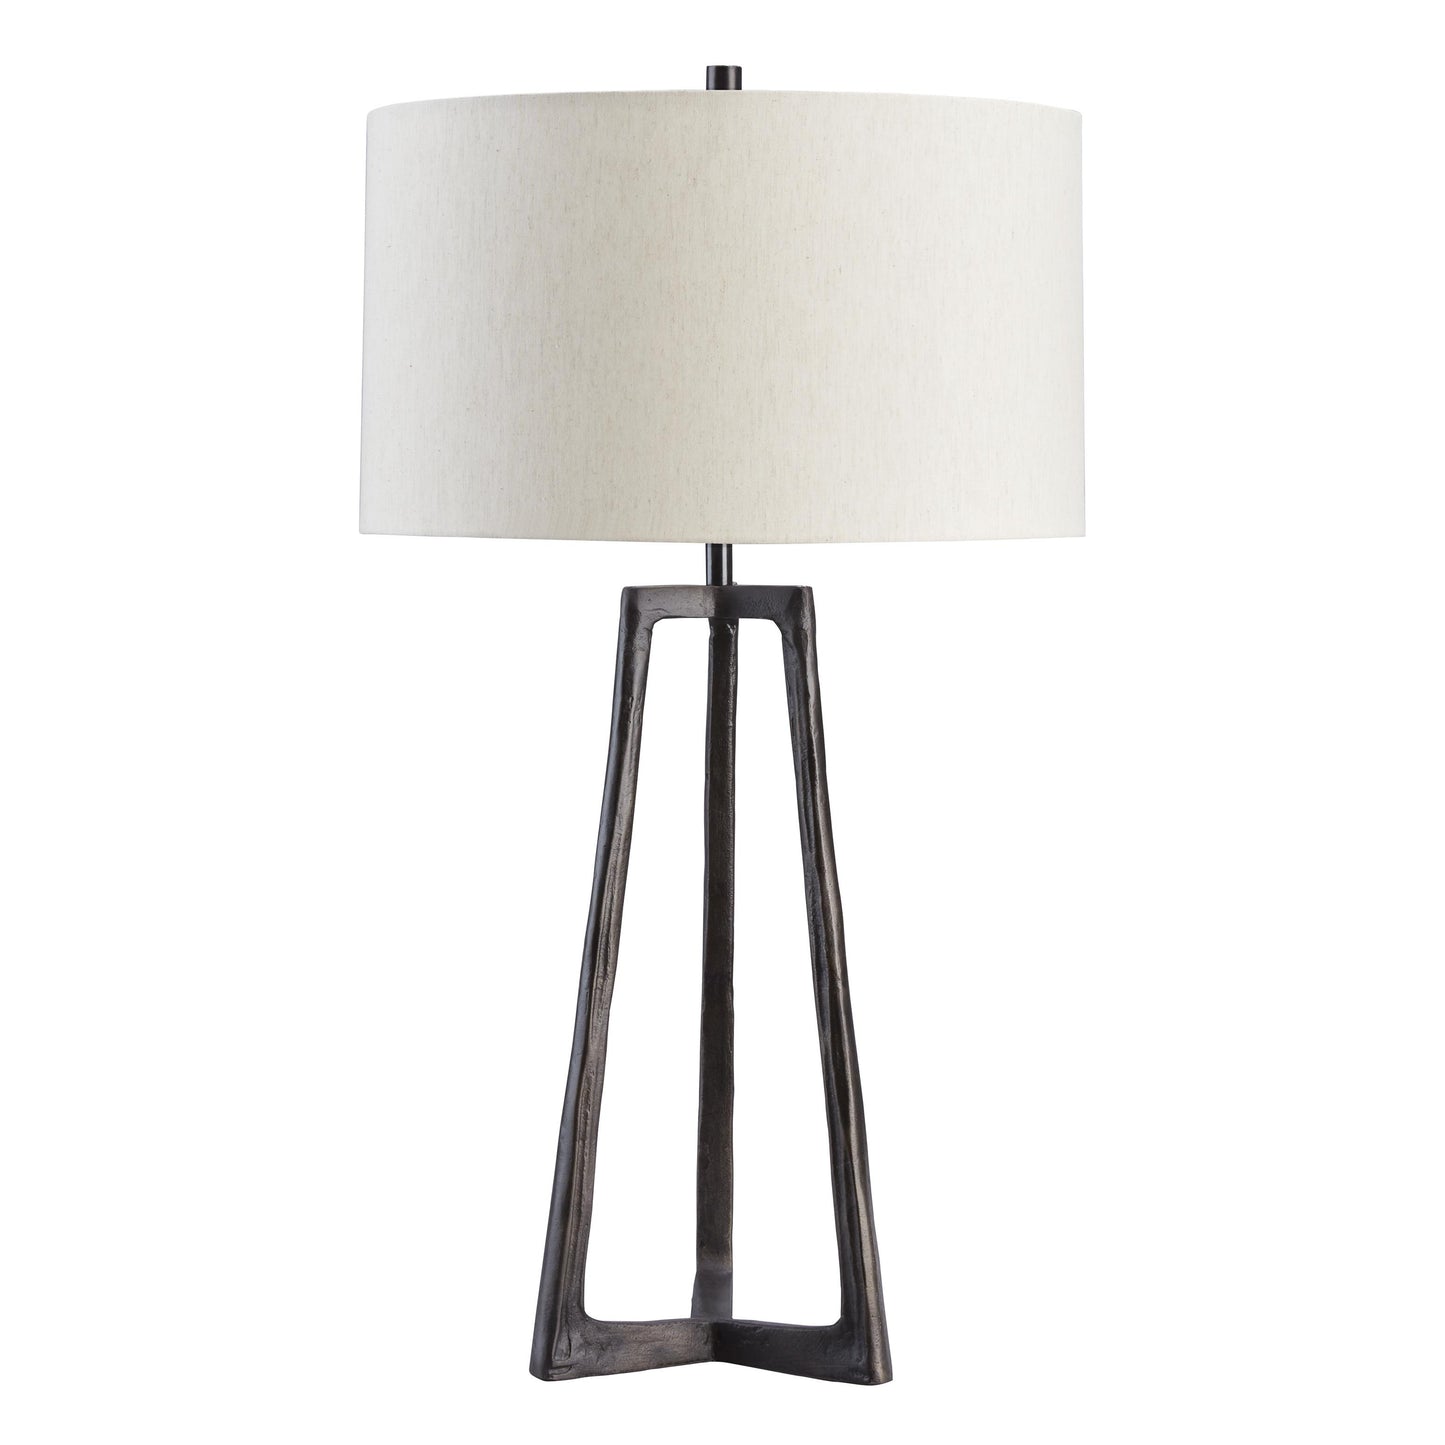 Signature Design by Ashley Ryandale Table Lamp L208344 IMAGE 1